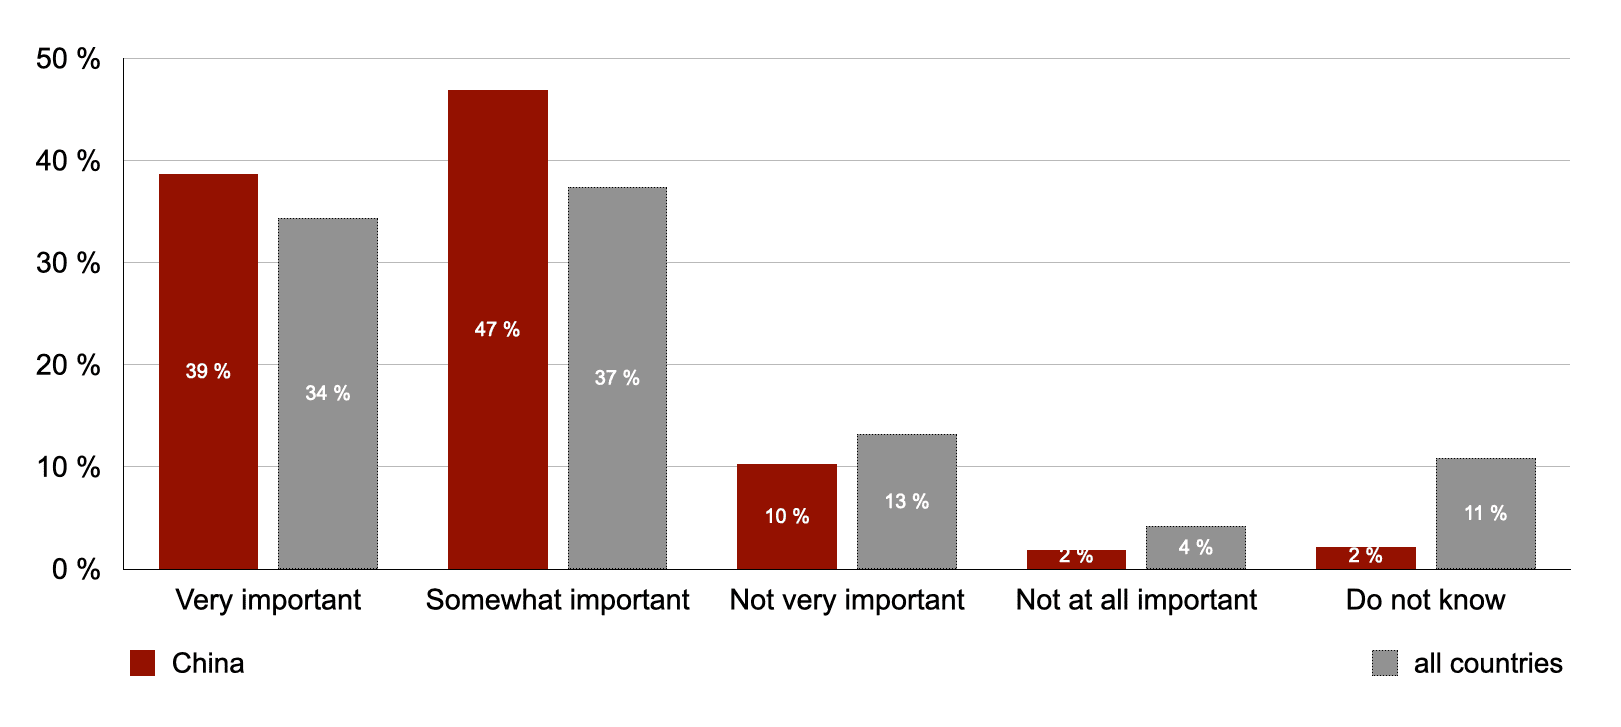 Very important: China 39% All countries 34%, Somewhat important: China 47% All 37%, Not very important: China 10% All 13%, Not at all important: China 2% All 4%, Don't know: China 2% All 11%